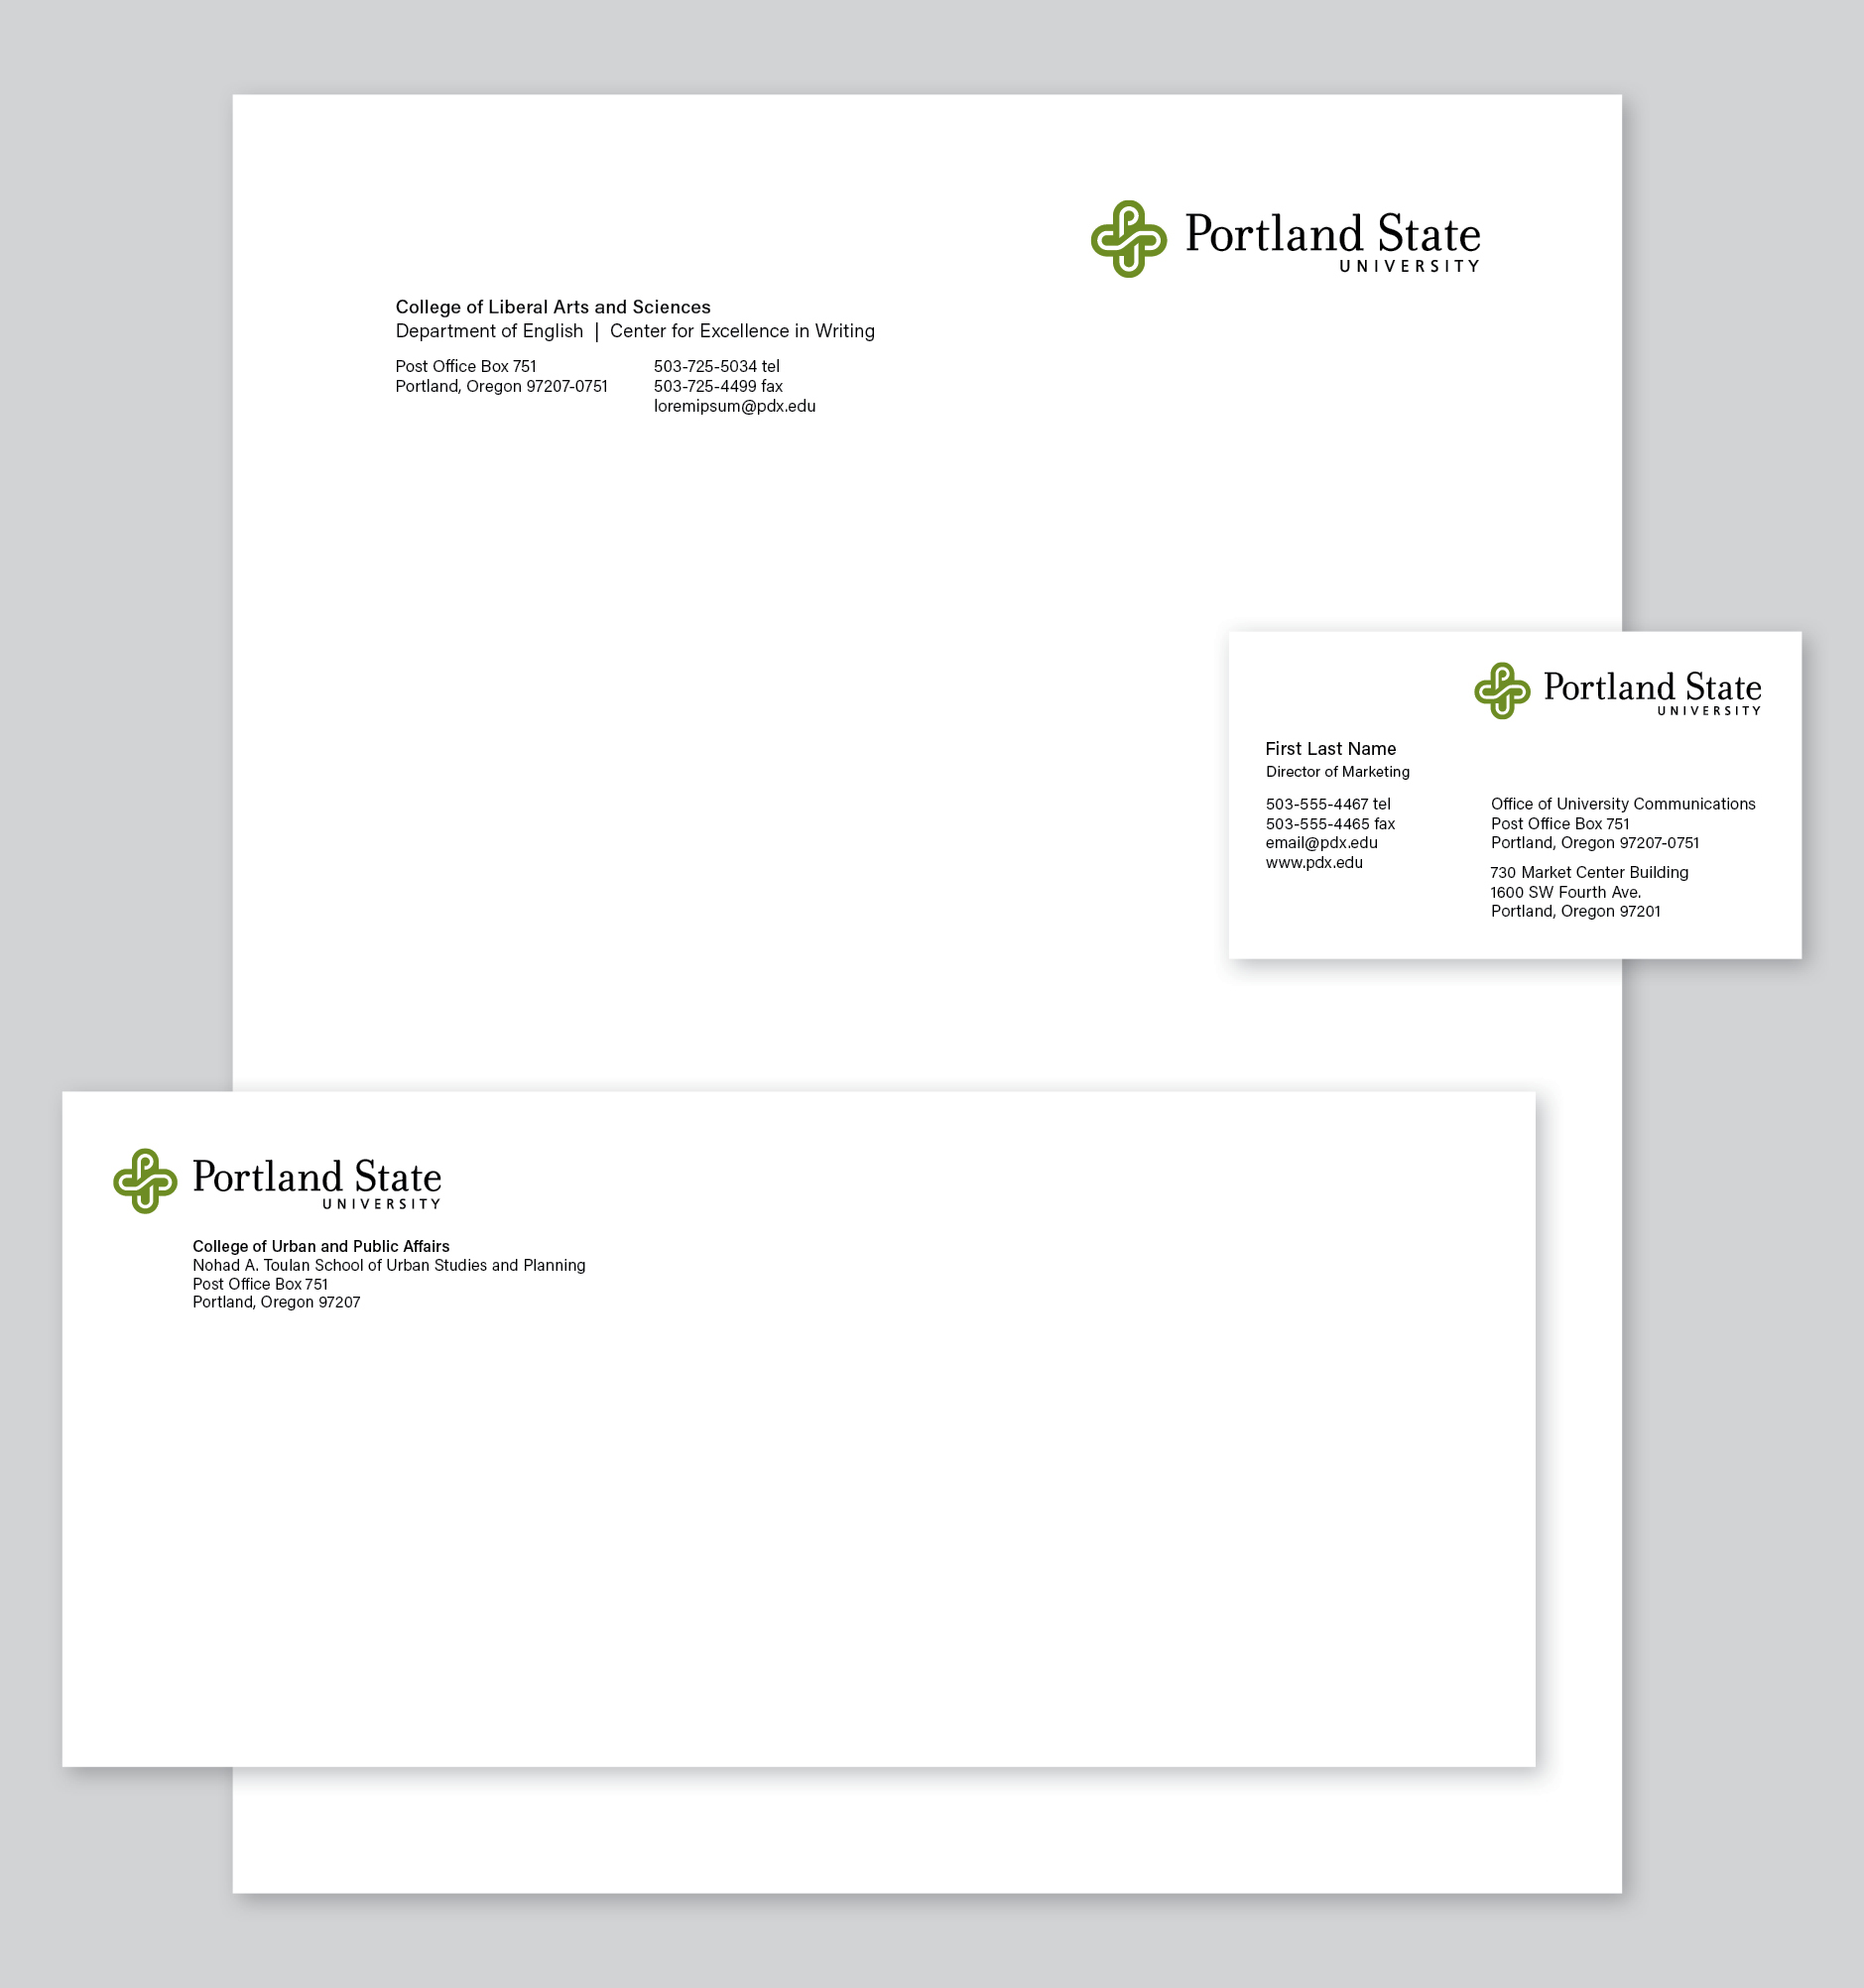 Examples of PSU Stationary